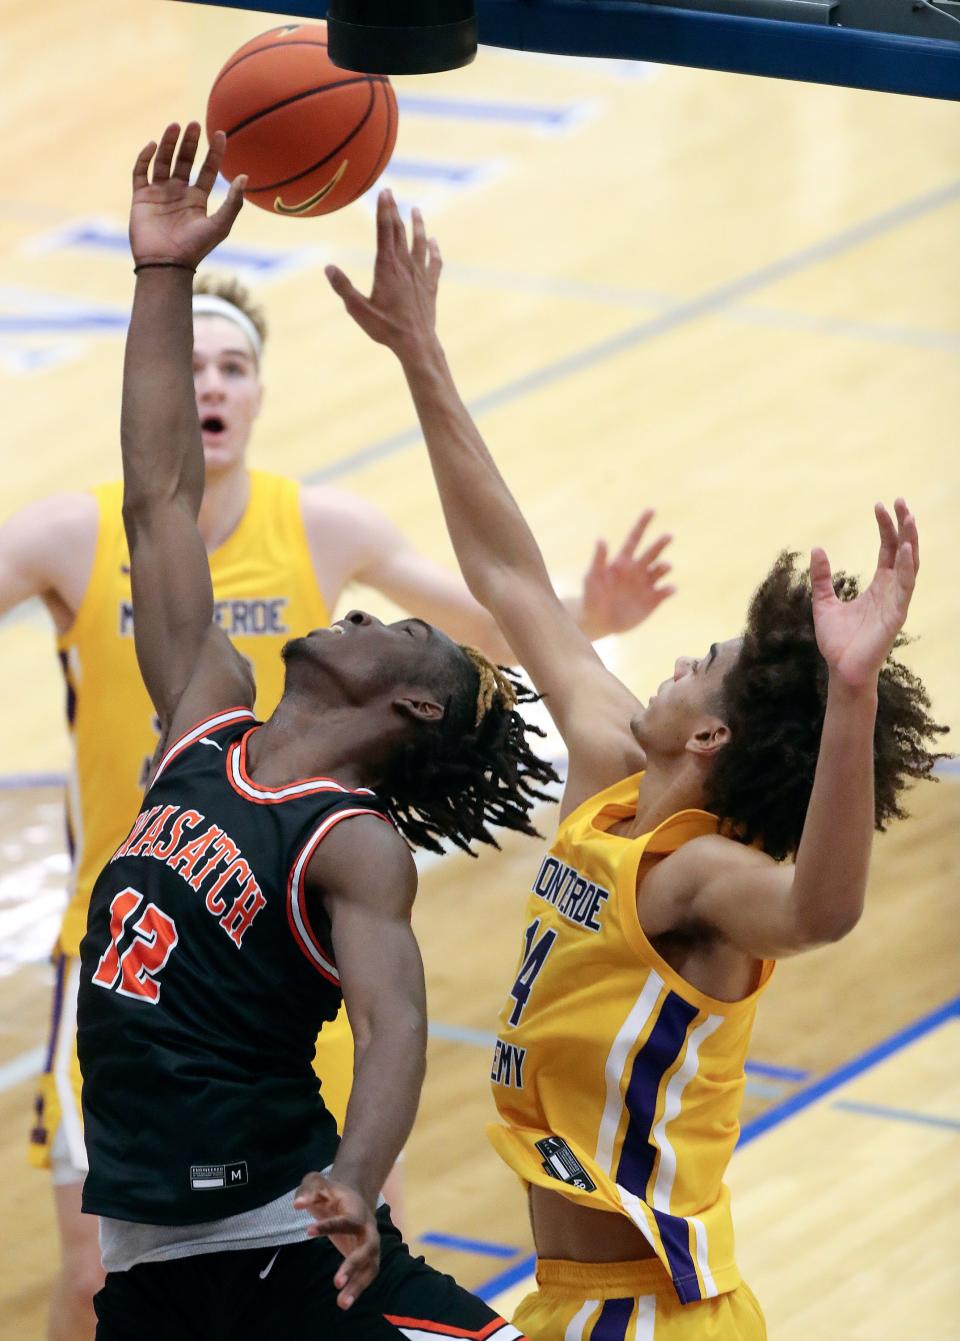 Wasatch Academy’s Chris Nwuli and Montverde Academy’s Asa Newell reach for the ball during a National Hoopfest Utah Tournament game at Pleasant Grove High School in Pleasant Grove on Monday, Nov. 20, 2023. Montverde won 88-53. | Kristin Murphy, Deseret News